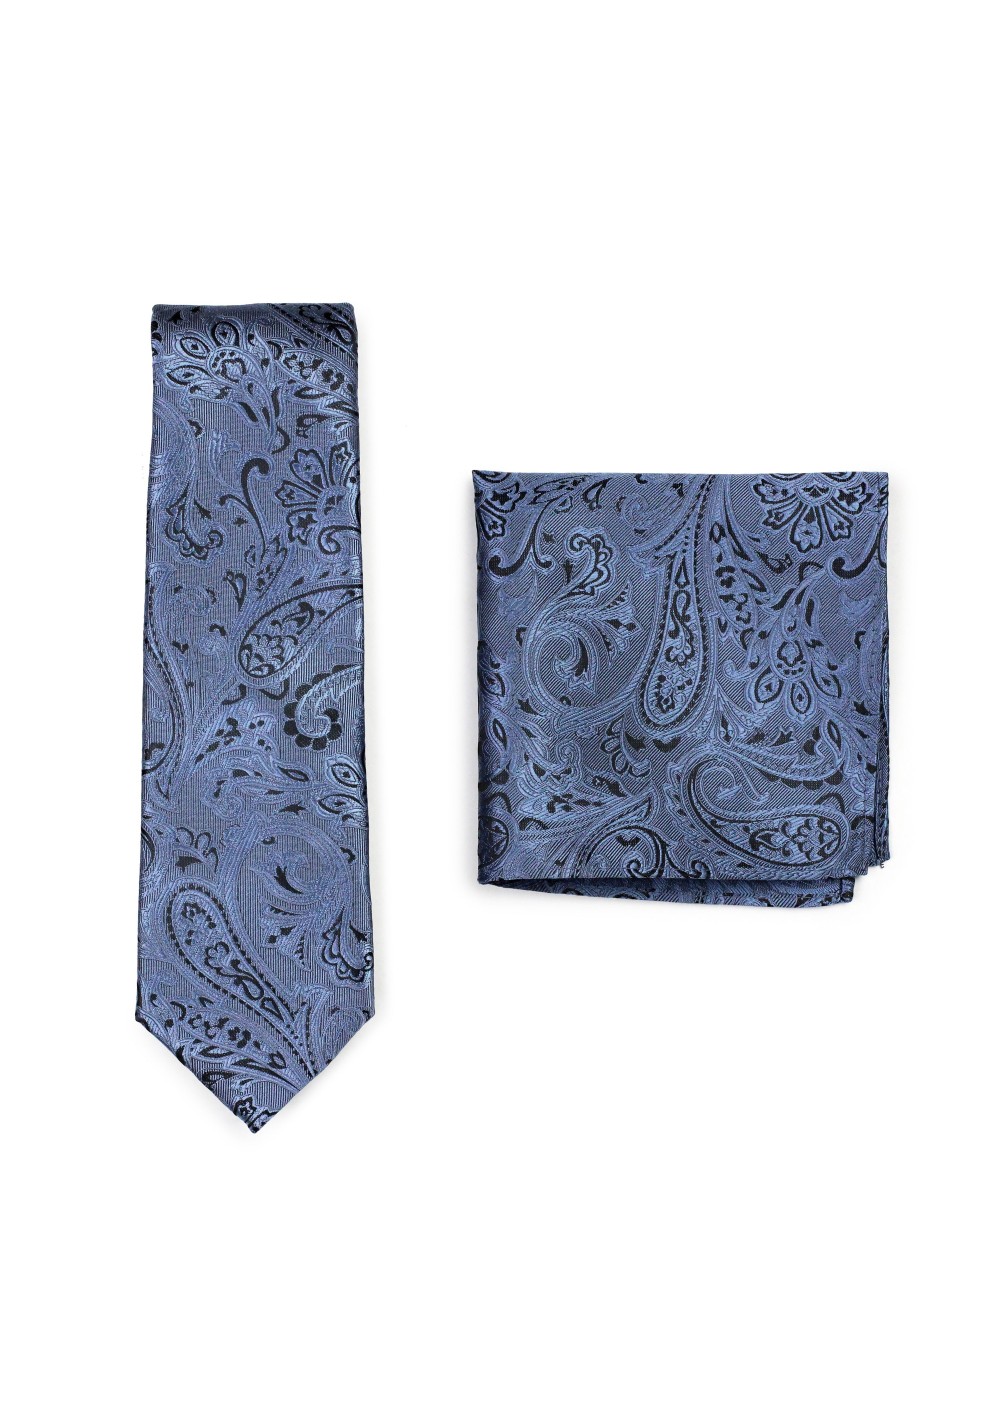 Steel Blue and Black Paisley Tie and Pocket Square Set